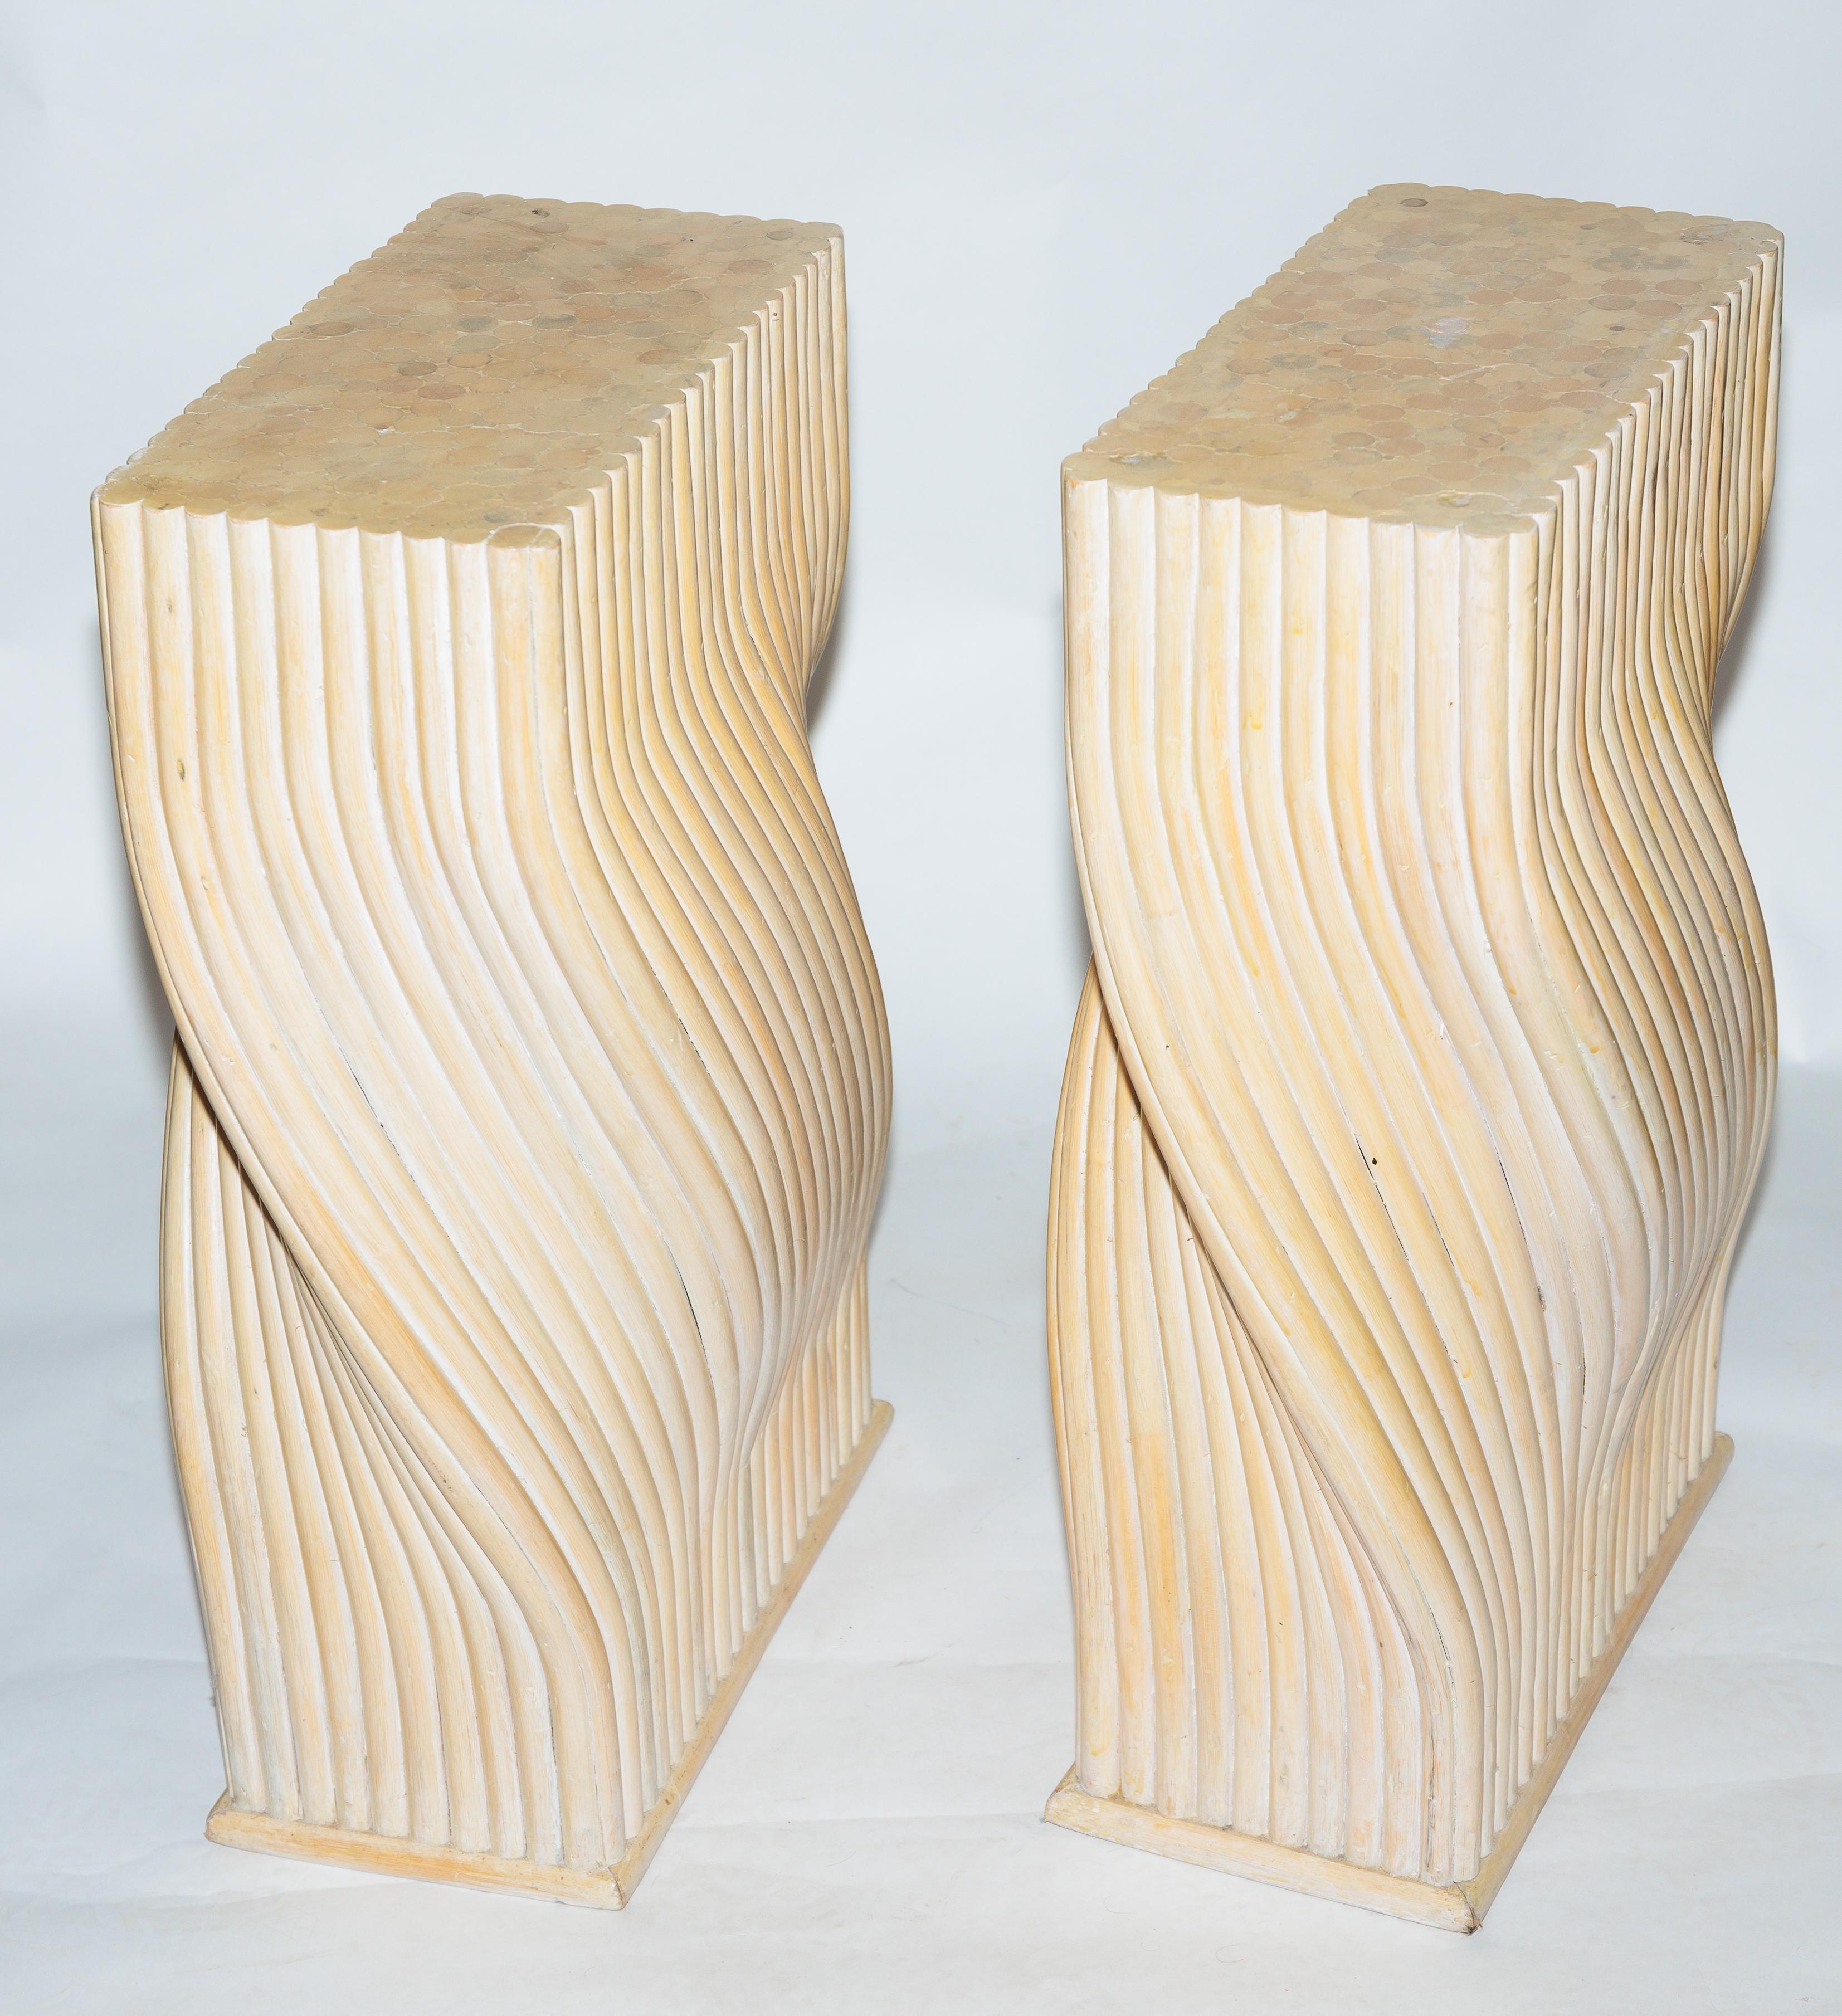 Bamboo Pedestal Bases, by McGuire 2